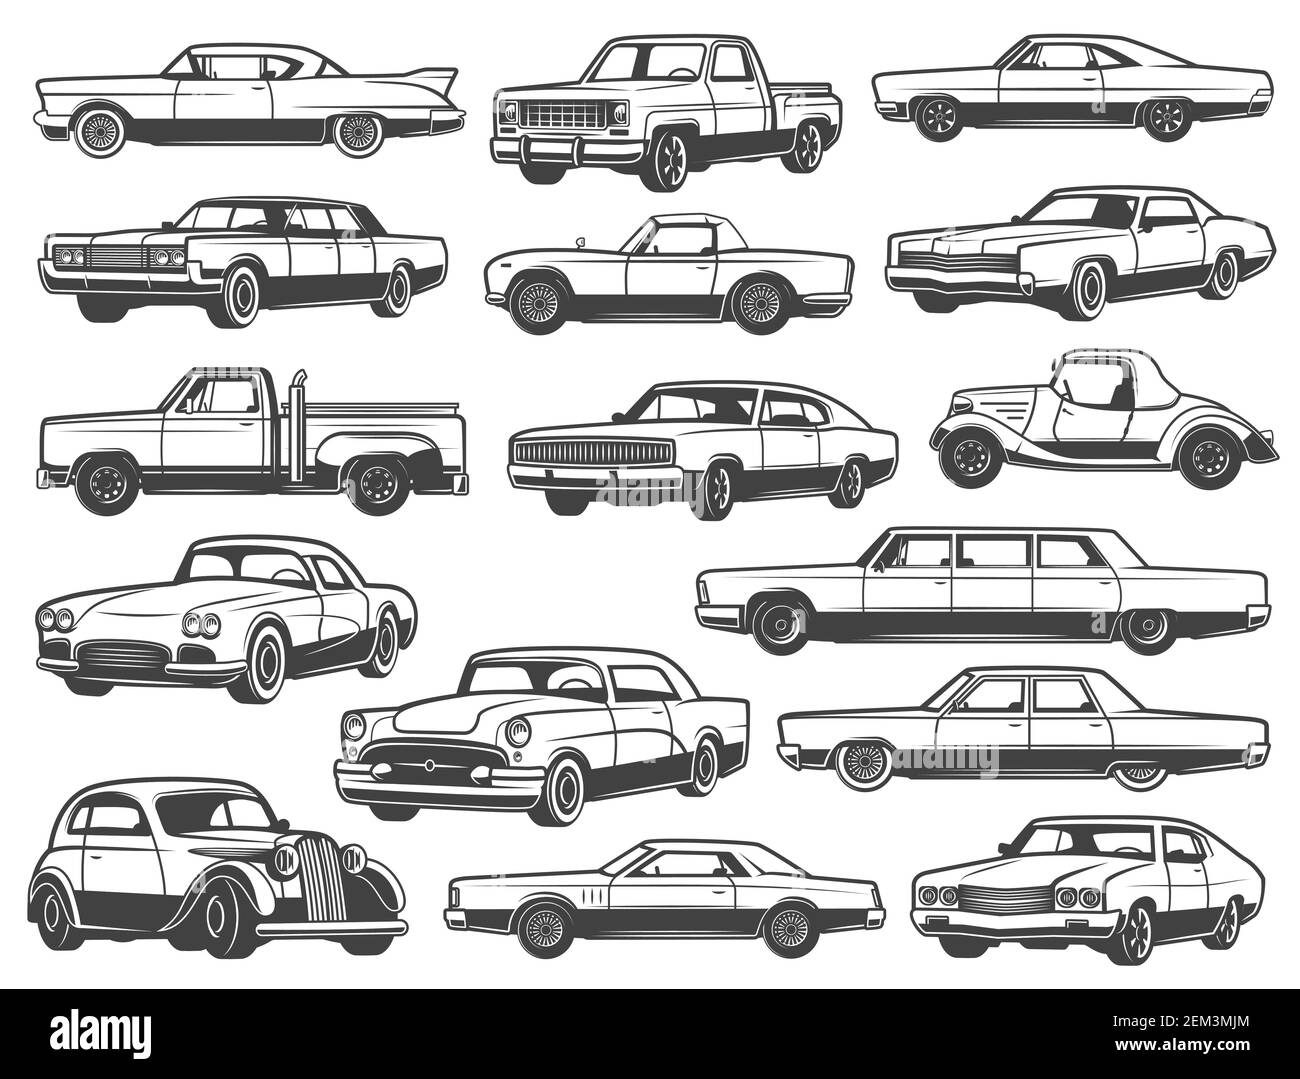 Retro car and vintage auto vector icons. Old classic vehicle models of automobiles, coupe, cabriolet and sedan, sportcar, pickup and mini truck, van a Stock Vector